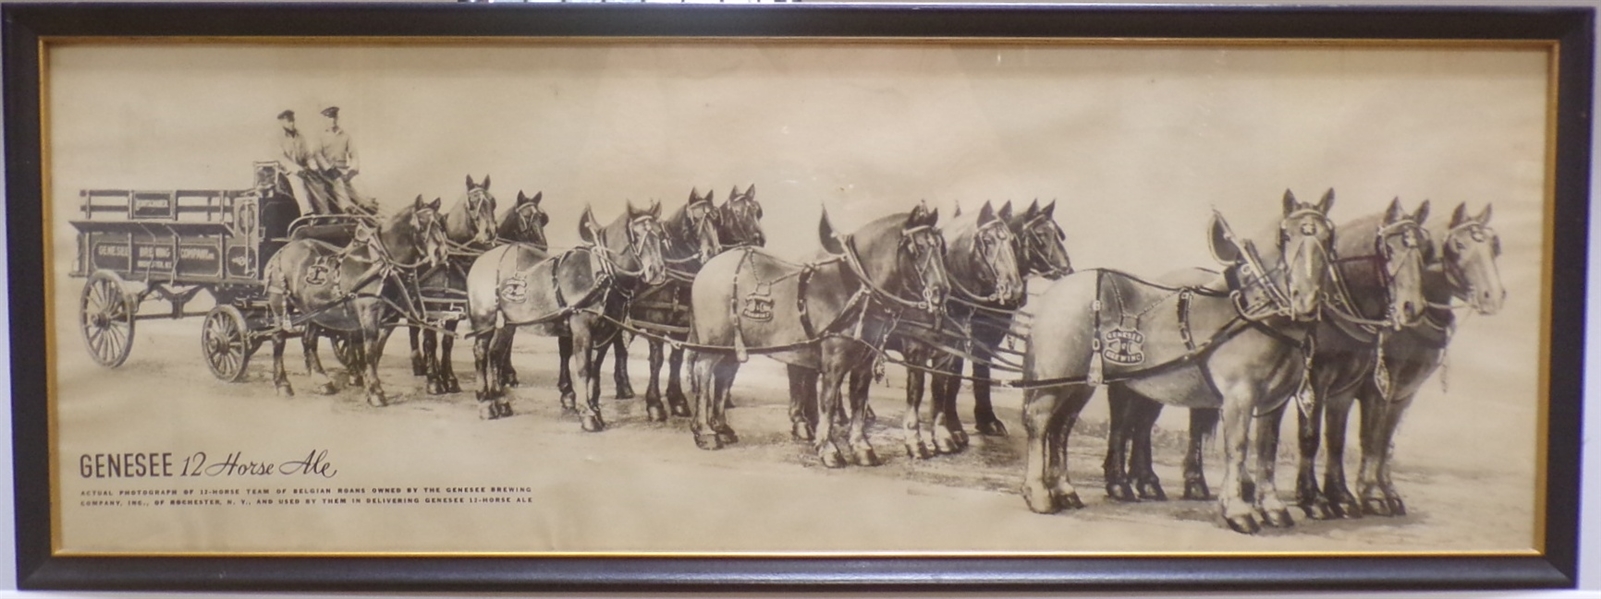 Genesee 12 Horse Ale Framed Advertising, Rochester, NY